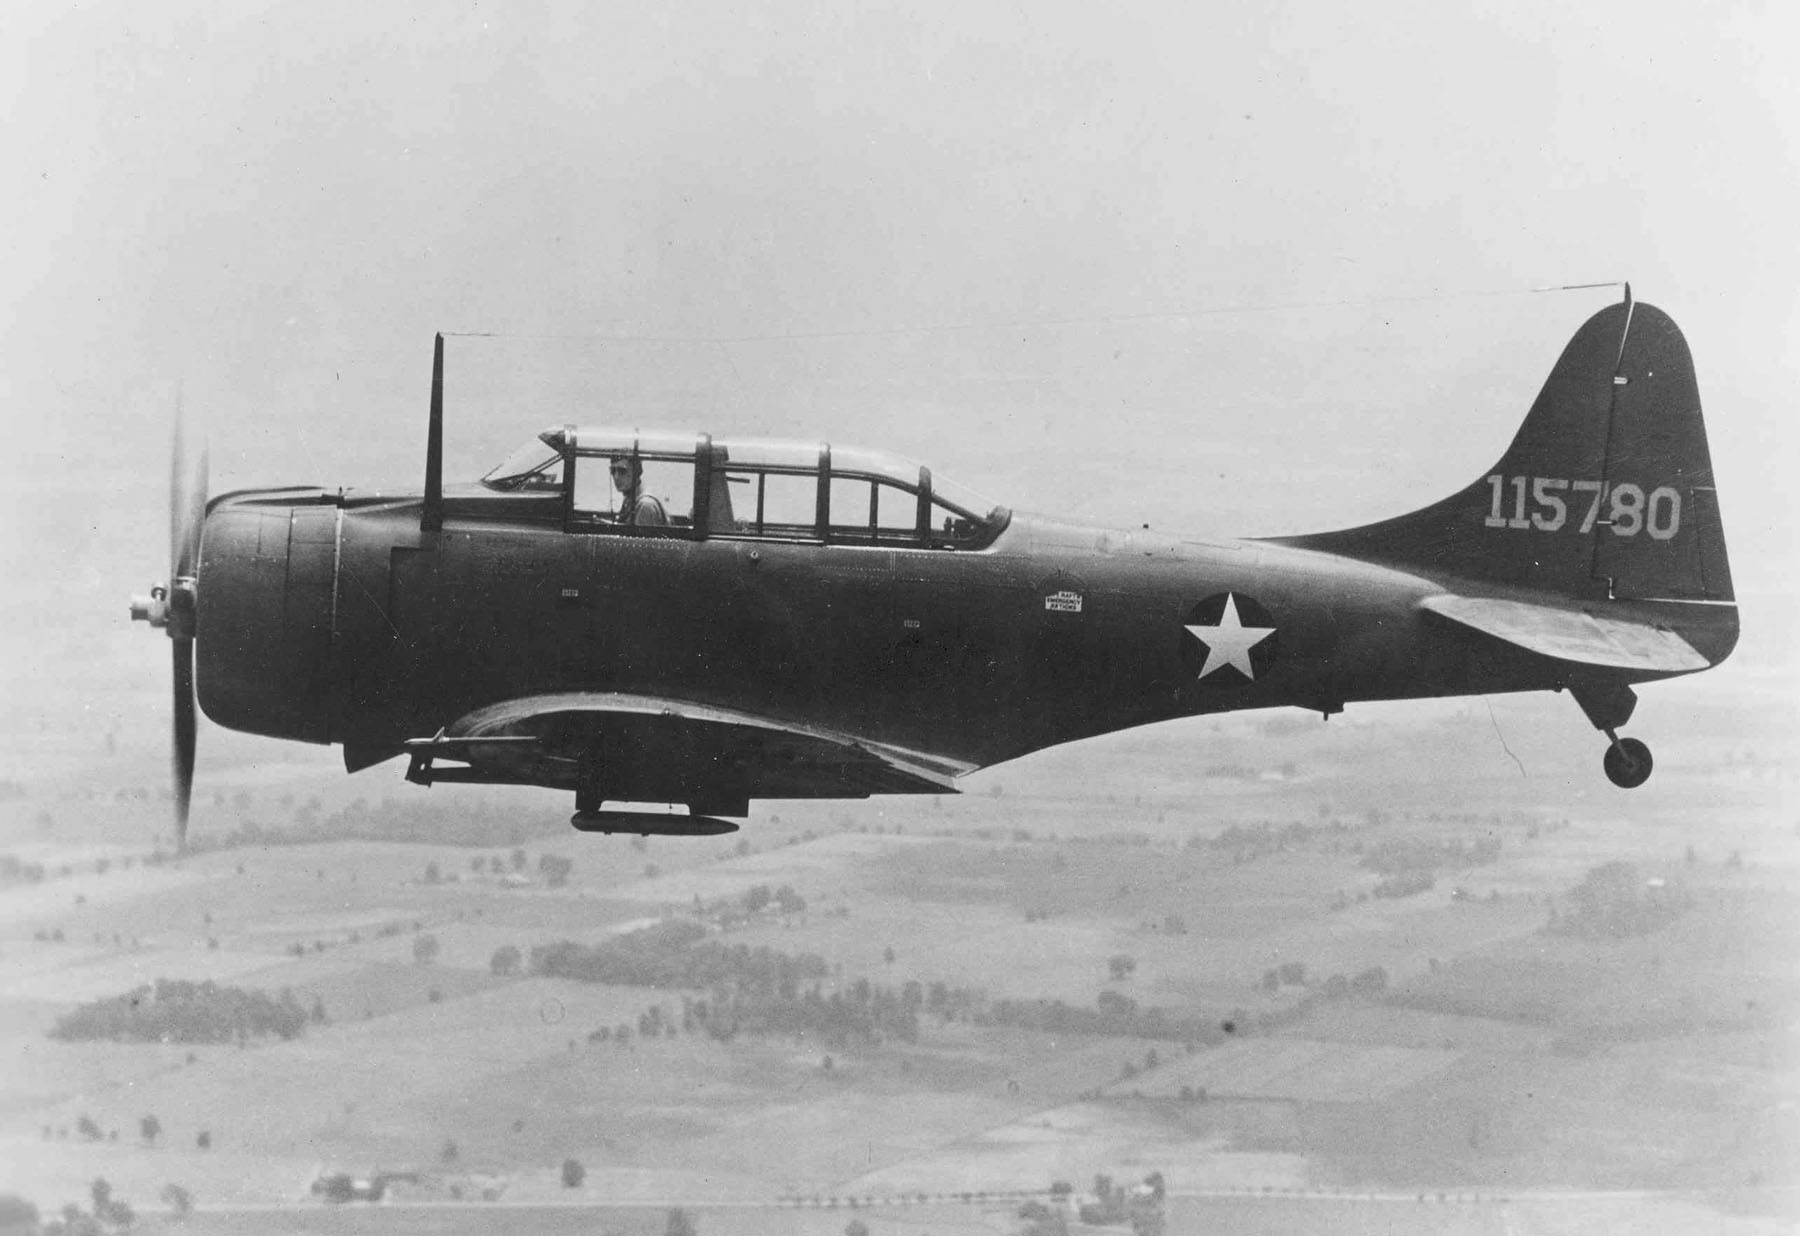 Early Douglas A-24 Banshee aircraft (serial number 41-15780) in flight, 1942